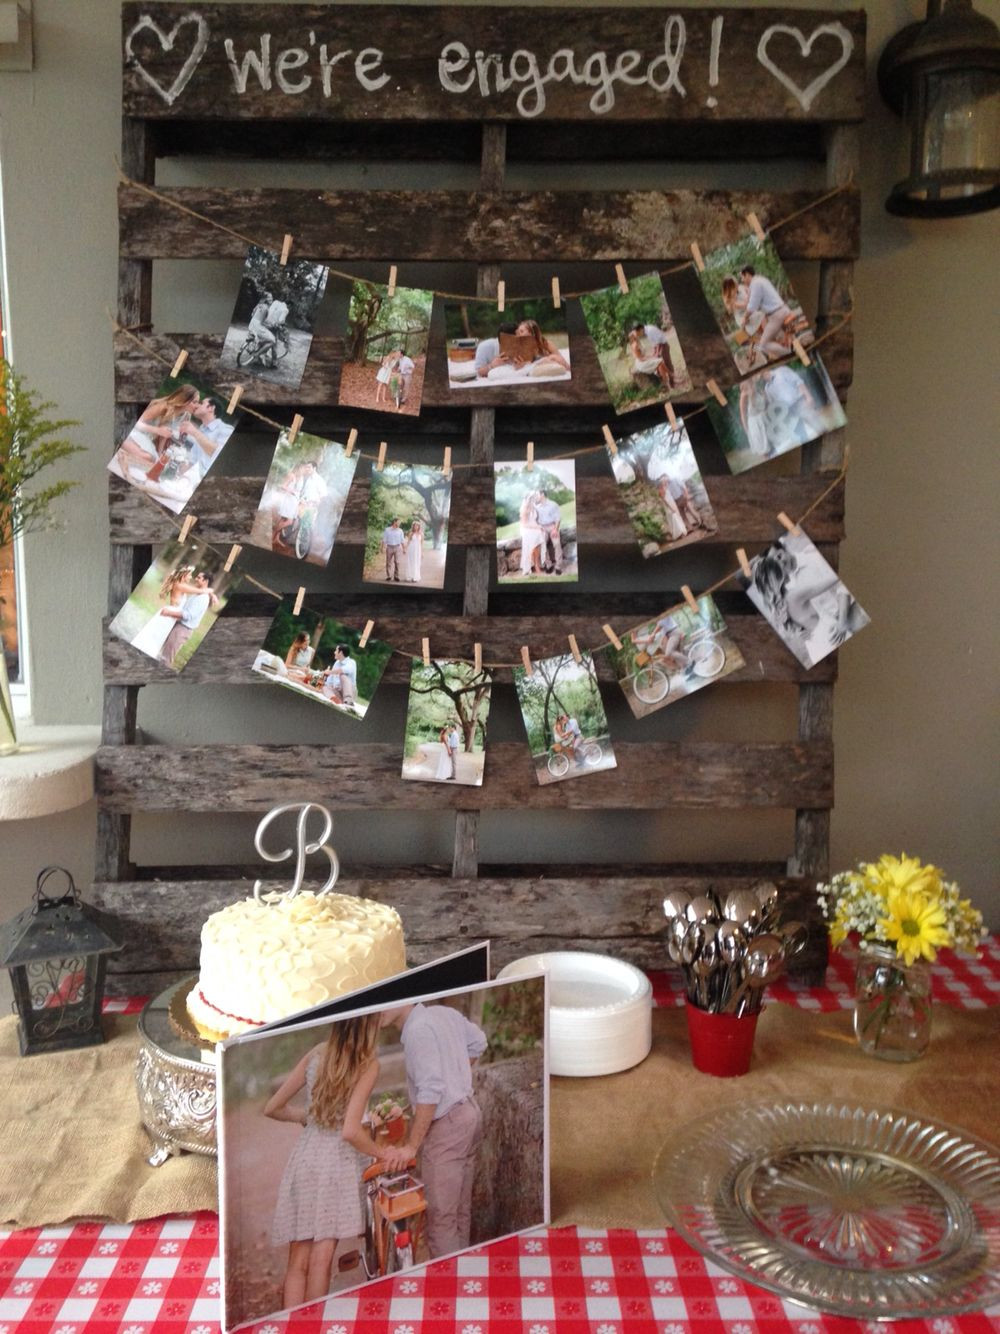 House Engagement Party Ideas
 I do BBQ …